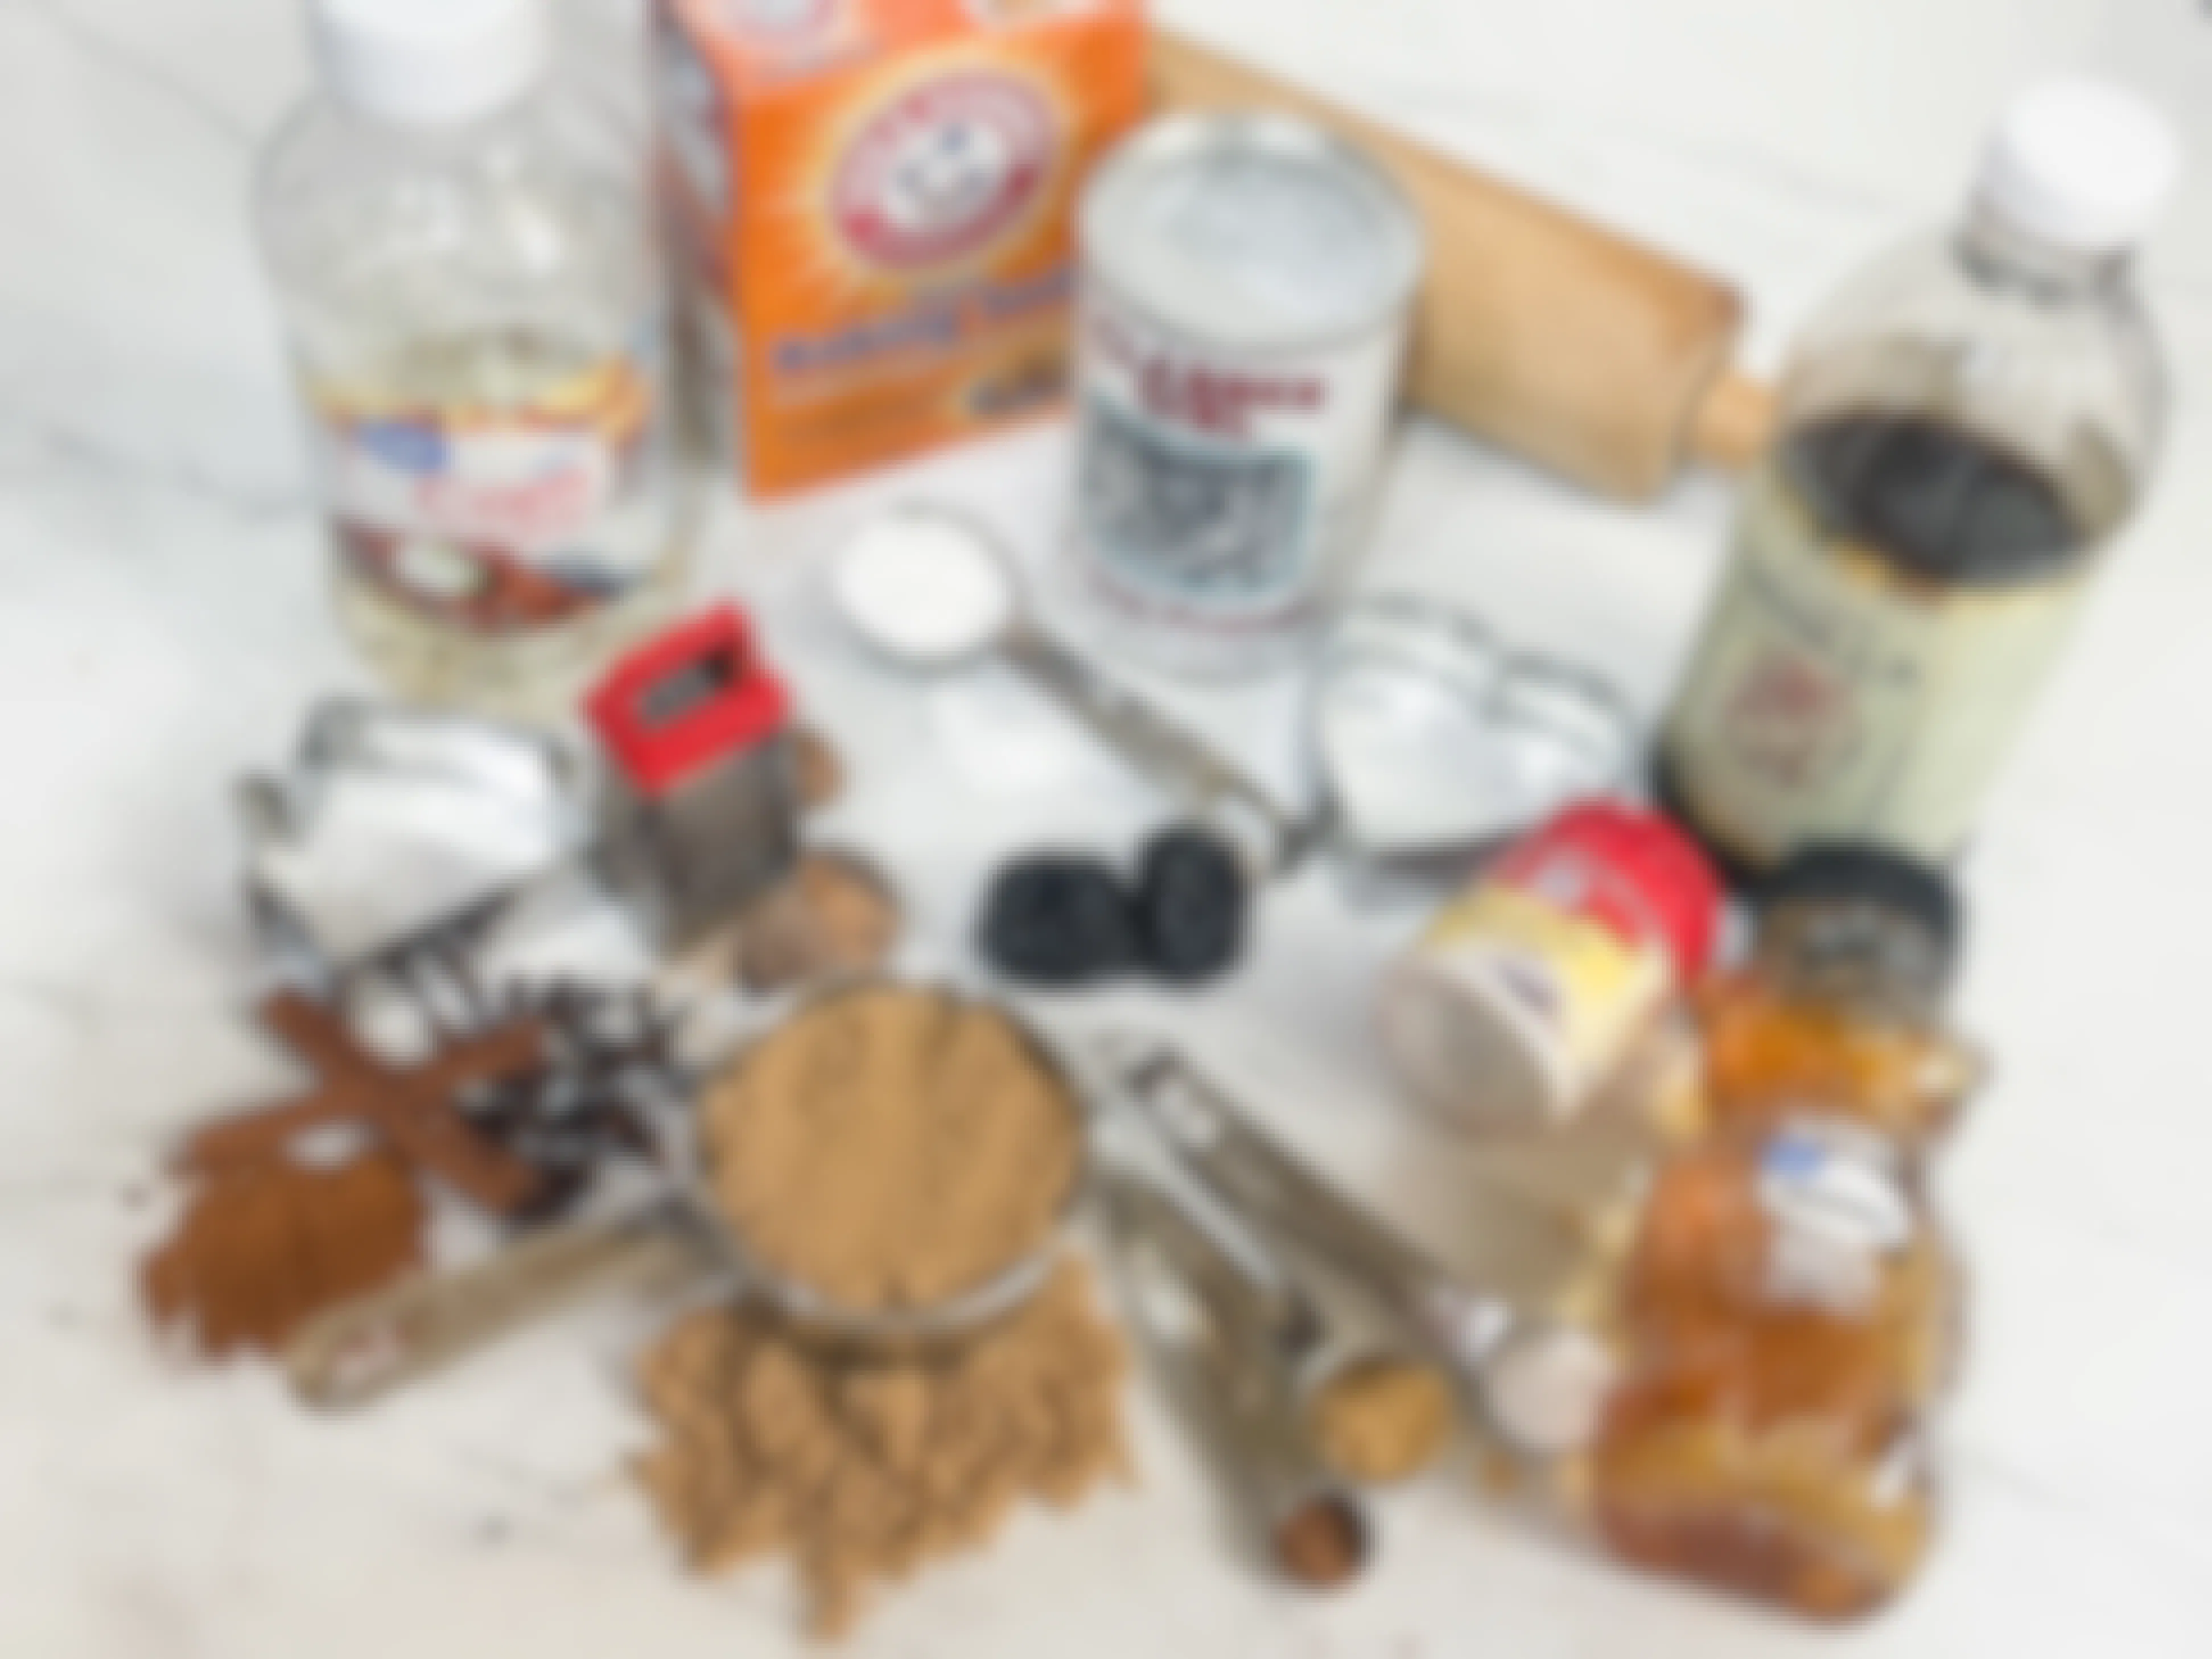 a mix of household ingredients on countertop 